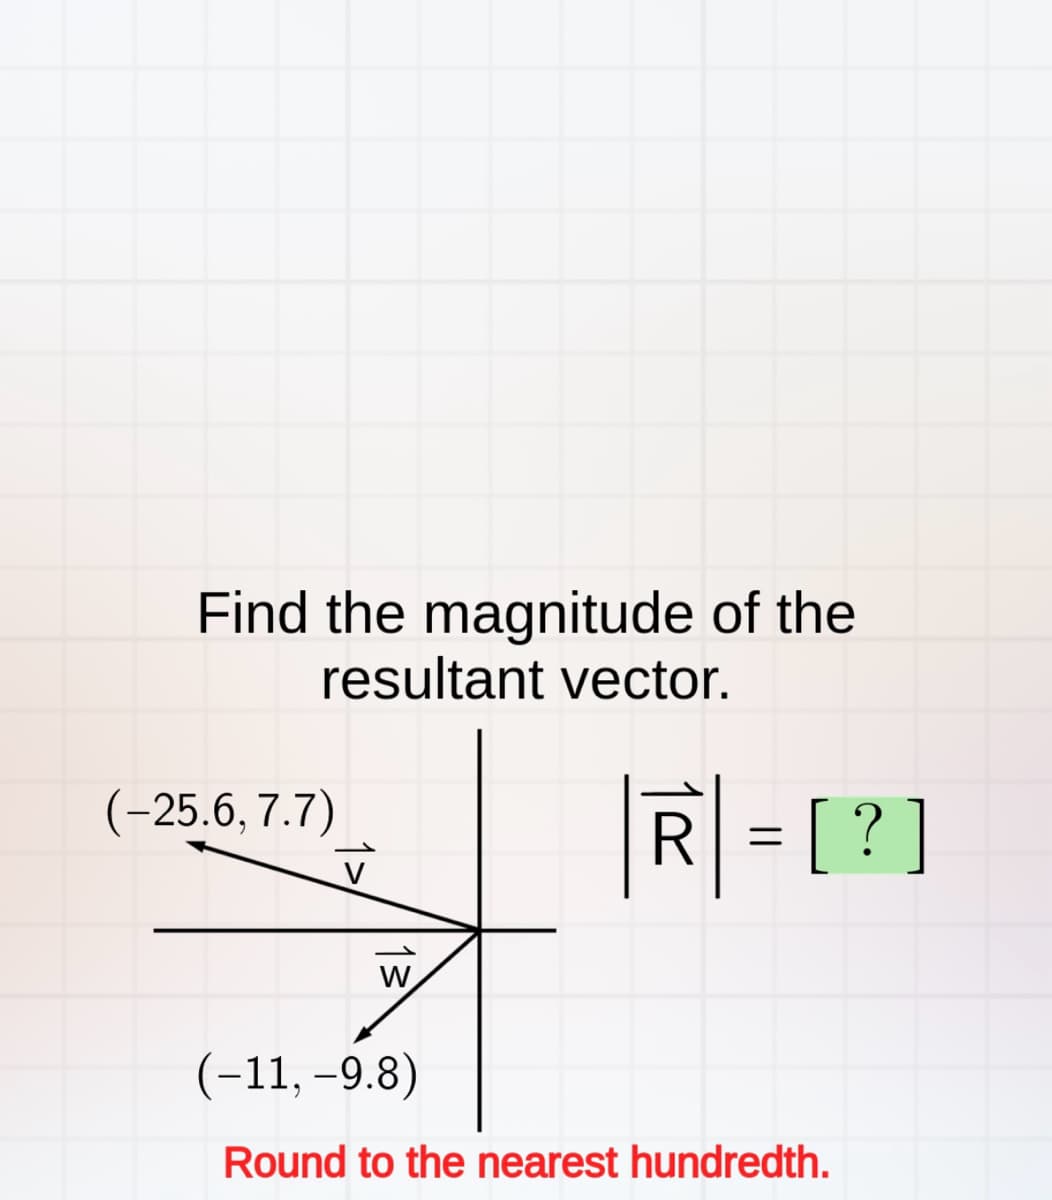 Find the magnitude of the
resultant vector.
(-25.6, 7.7)
V
W
R = [?]
(-11, -9.8)
Round to the nearest hundredth.